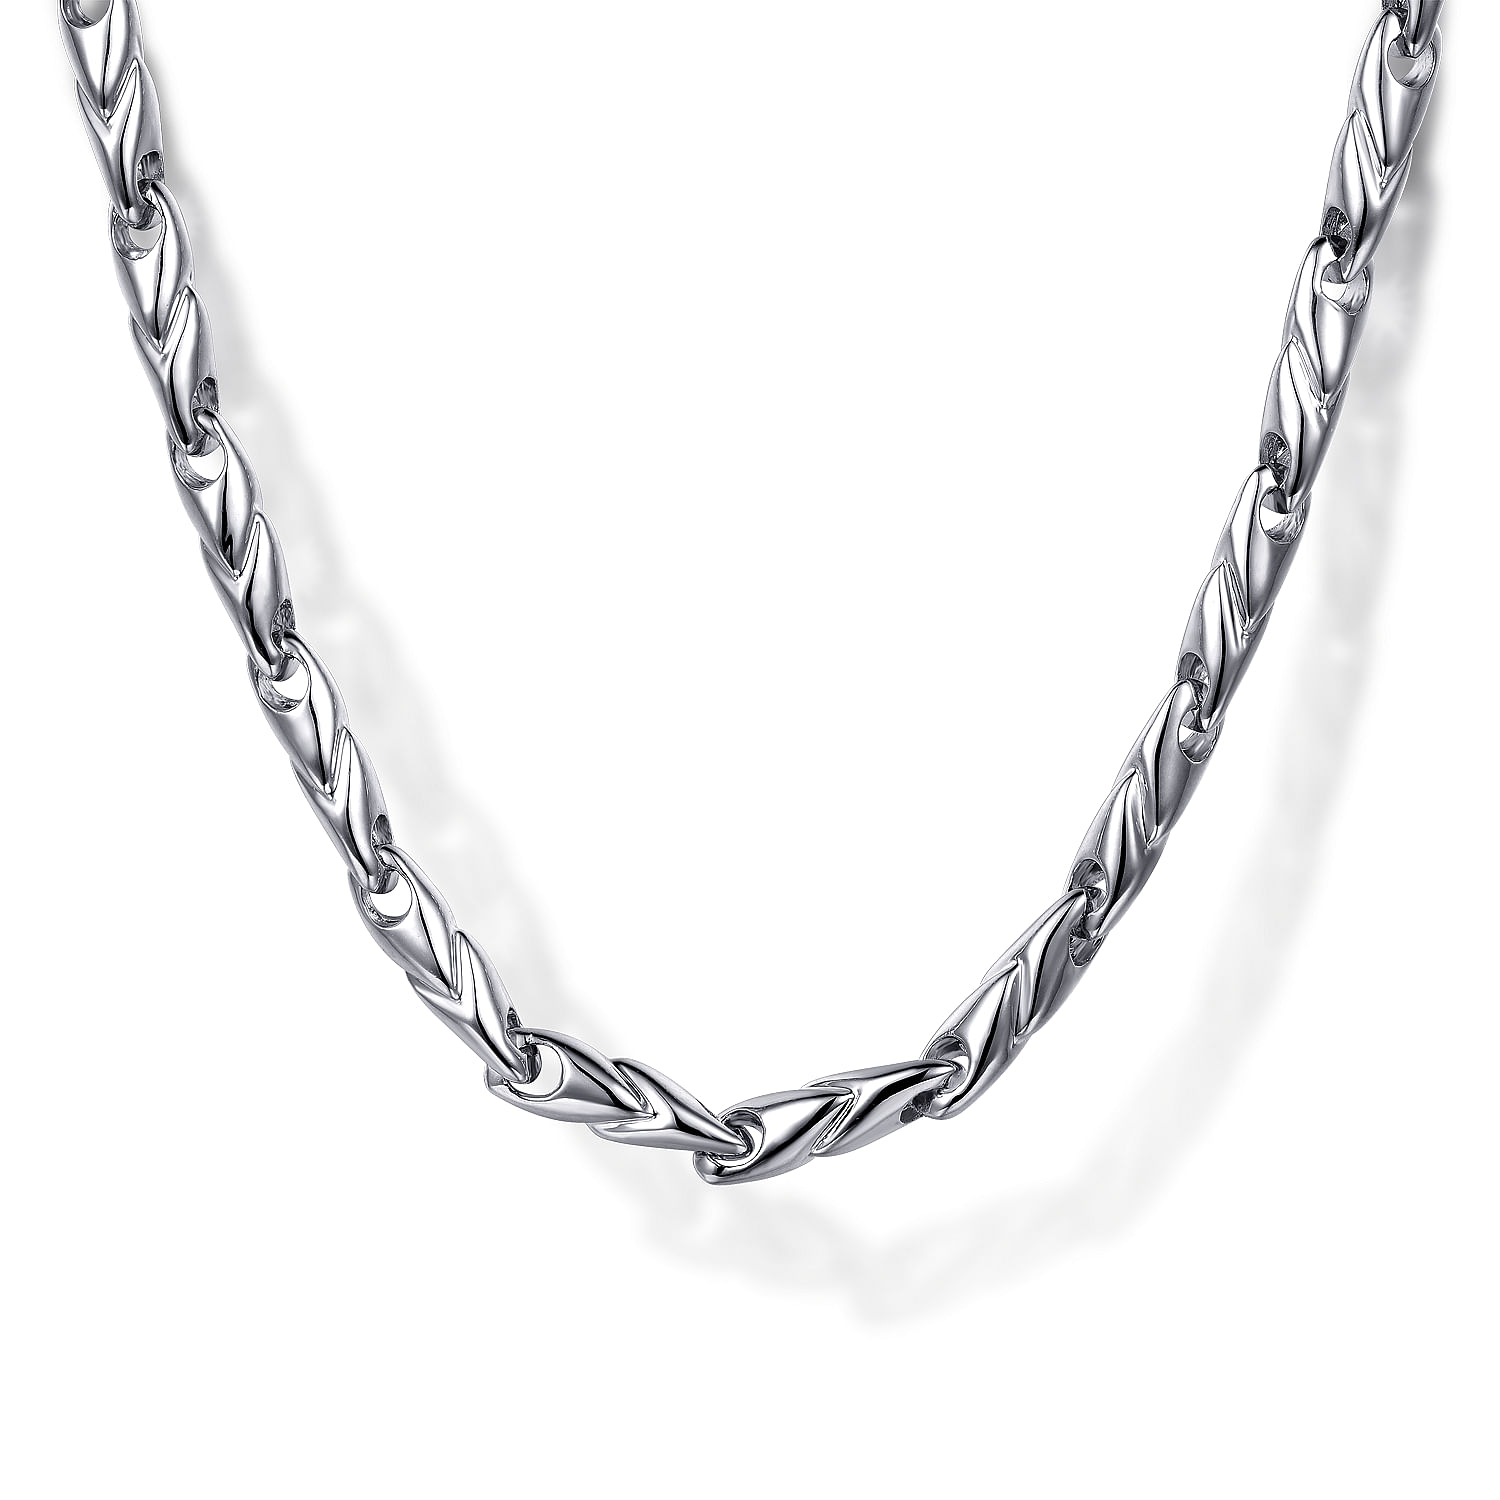 22-Inch-925-Sterling-Silver-Men's-Chain-Necklace1